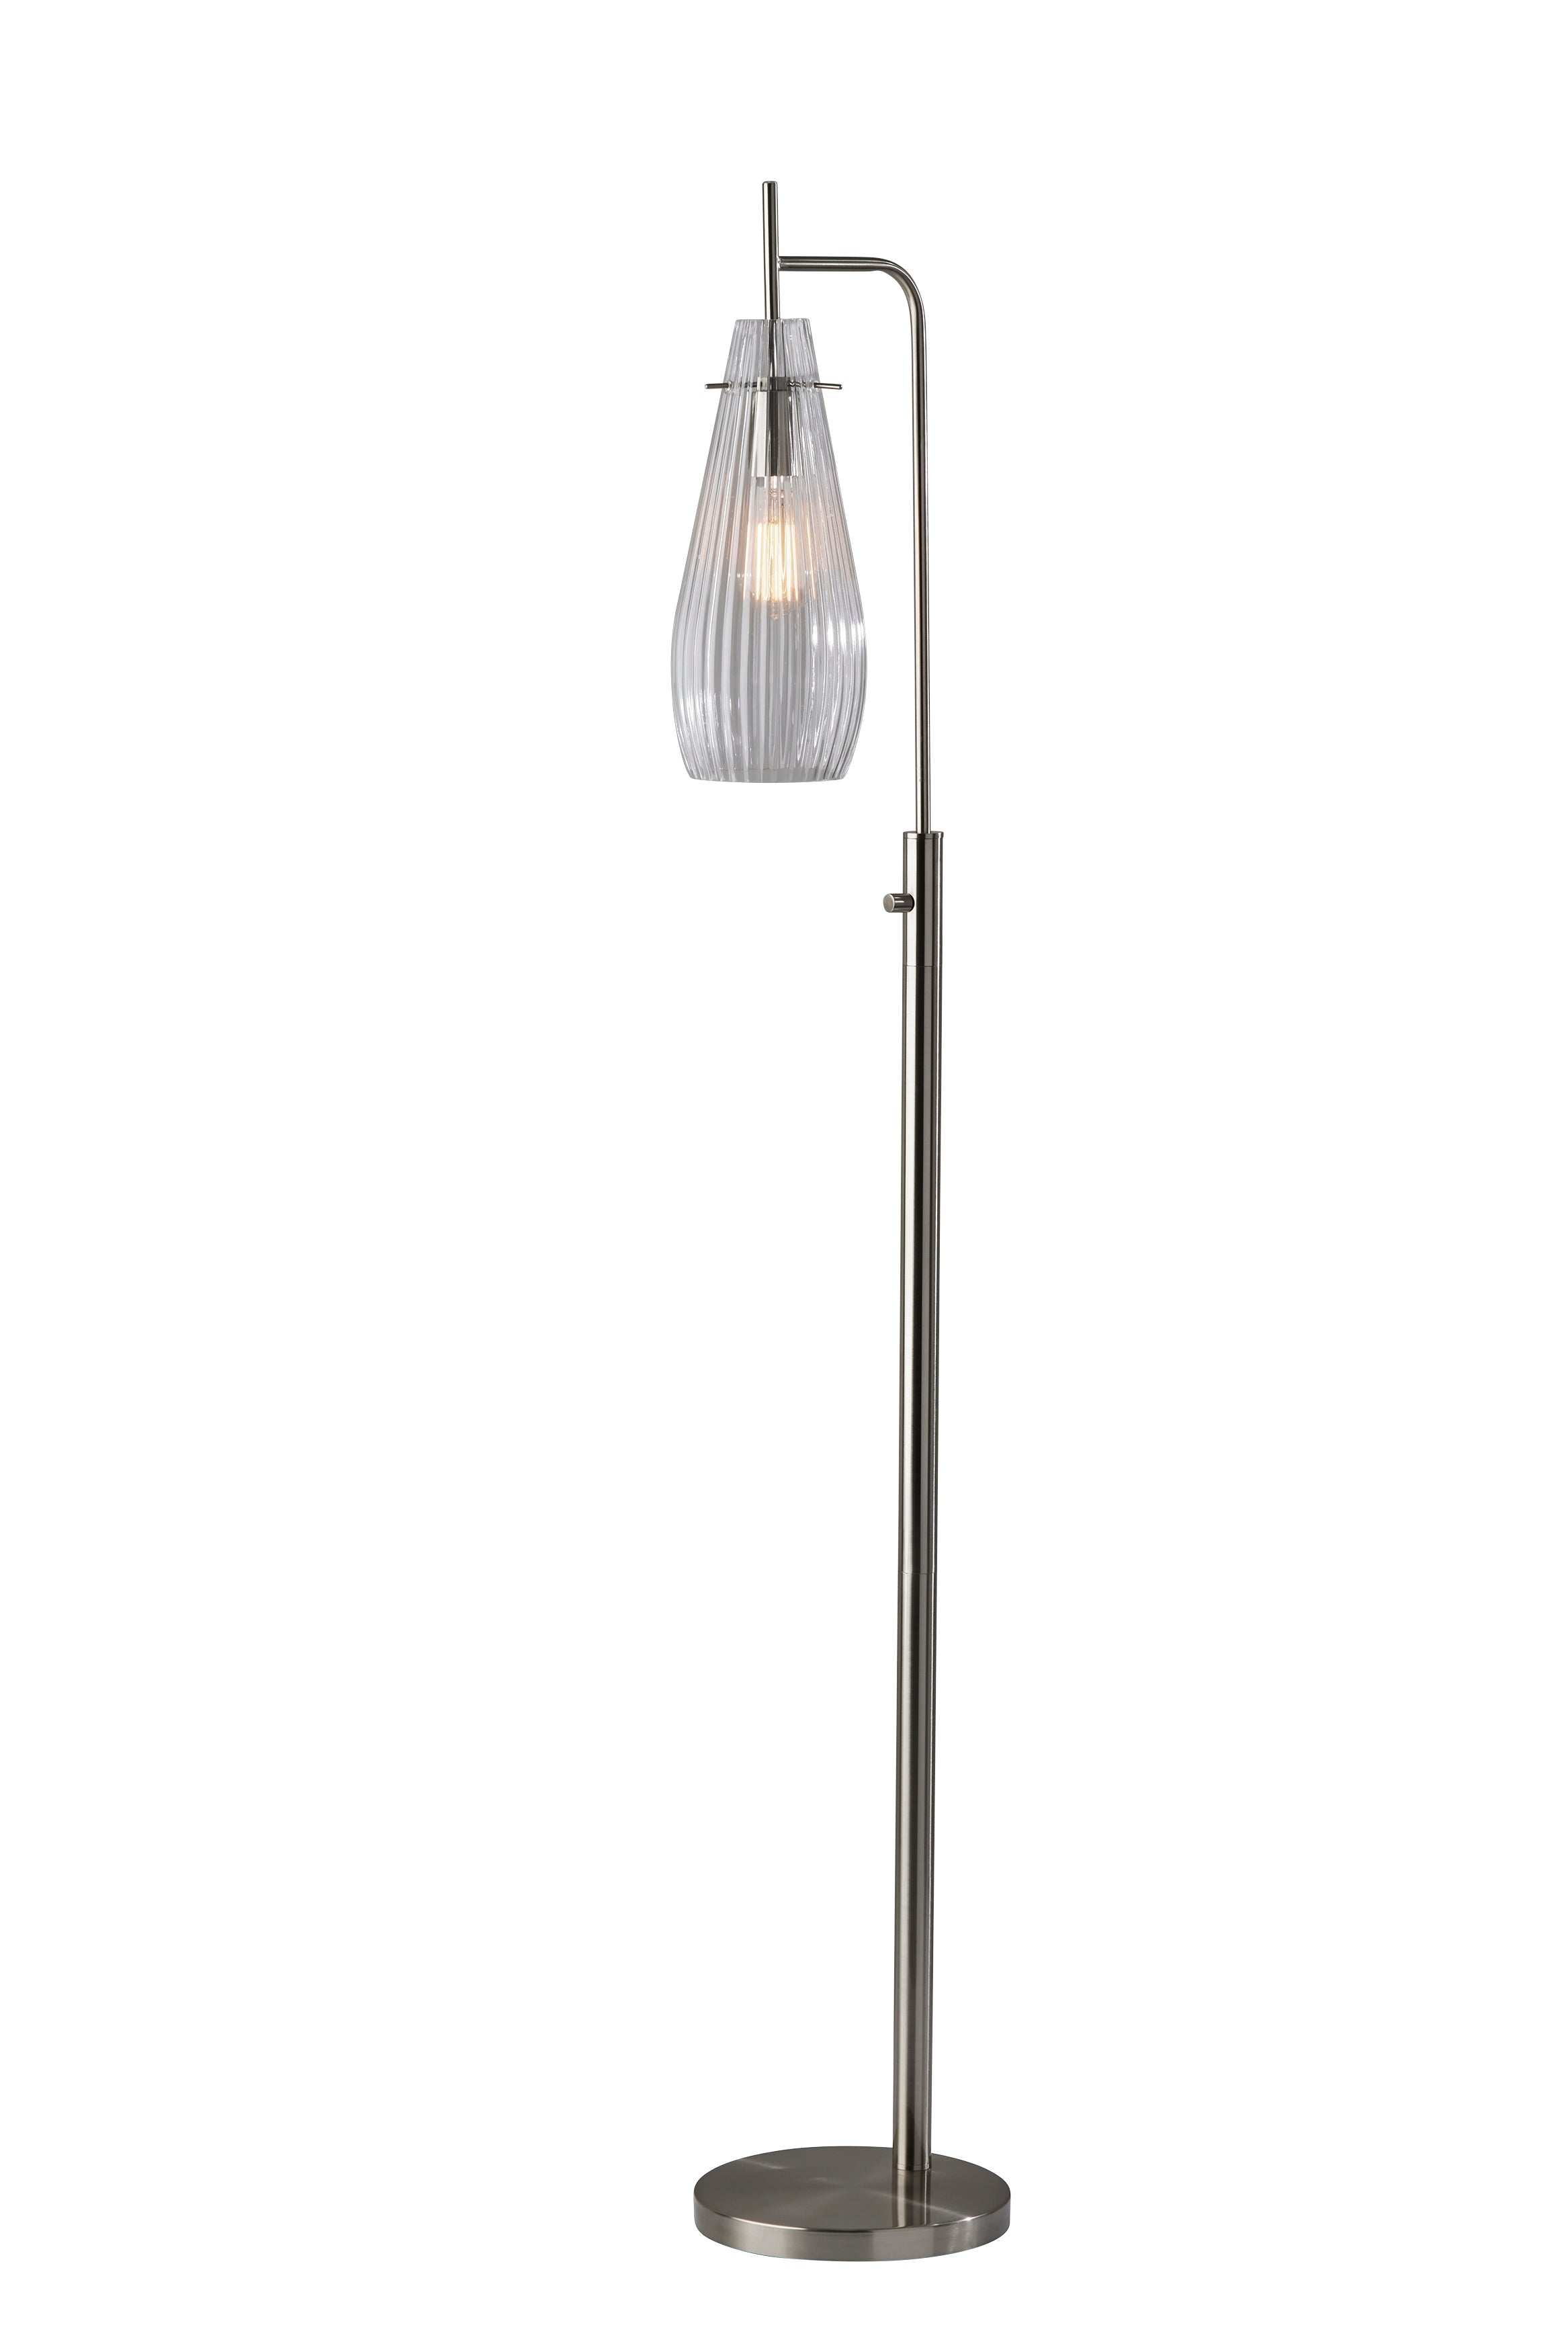 LAYLA Floor lamp Stainless steel - 2148-22 | ADESSO